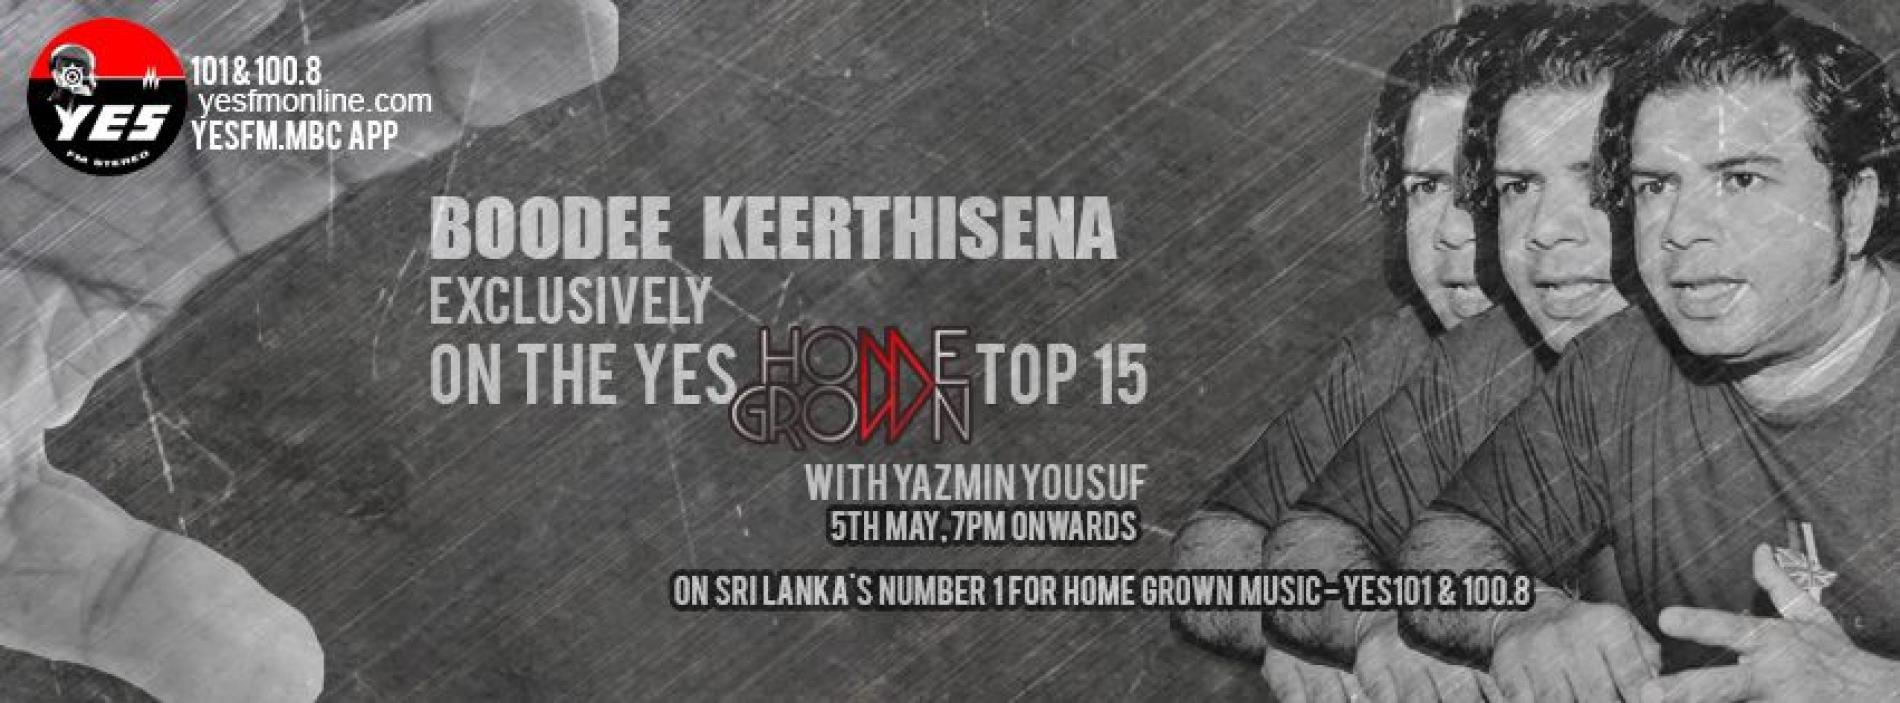 Boodee Keerthisena On The YES Home Grown Top 15